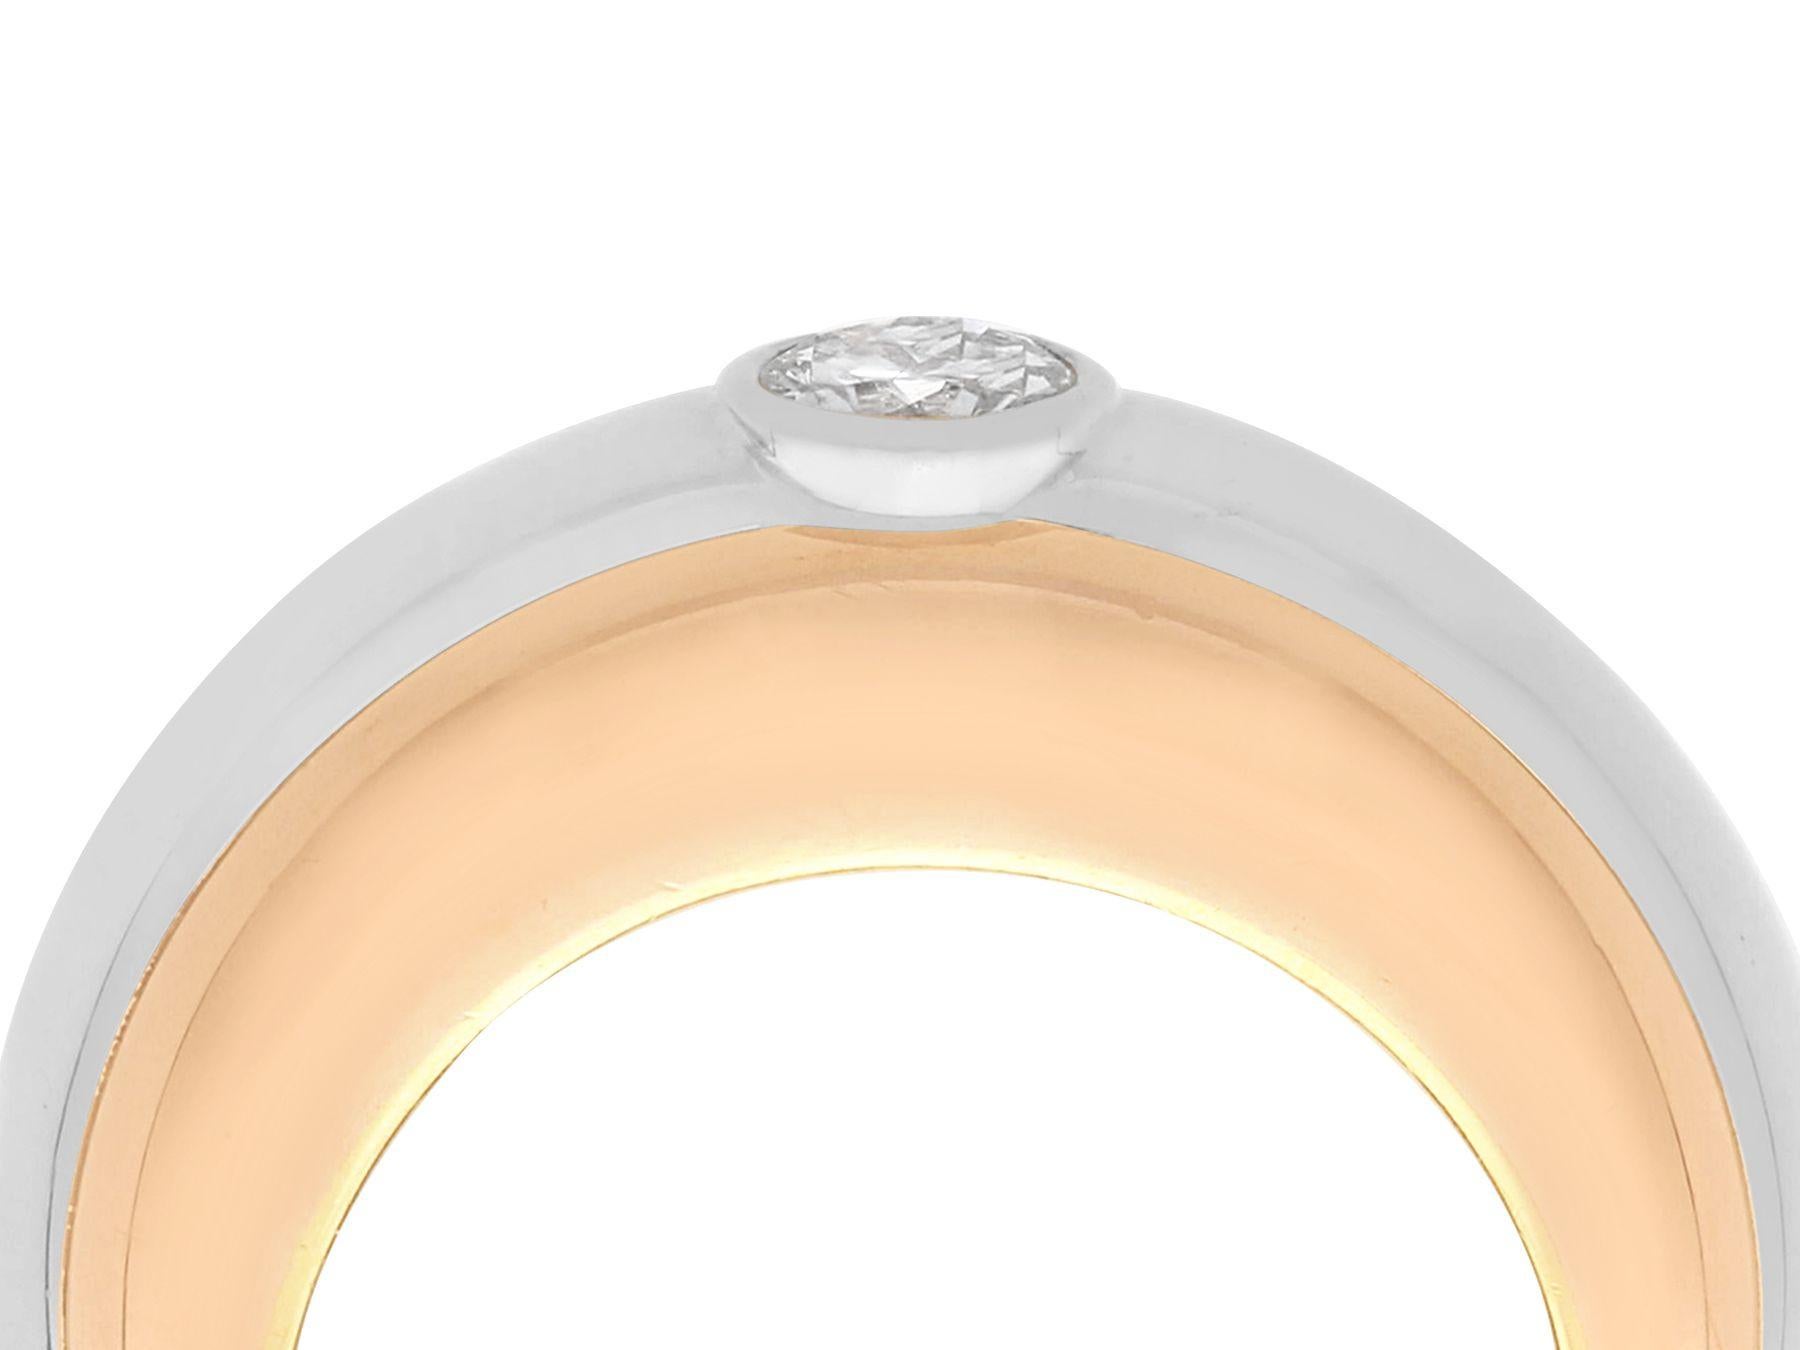 A stunning, fine and impressive 0.54 carat diamond, 18 carat yellow gold, white gold and rose gold solitaire ring; part of our diverse contemporary jewelry collections. 

This stunning, fine and impressive Cartier diamond ring has been crafted in 18